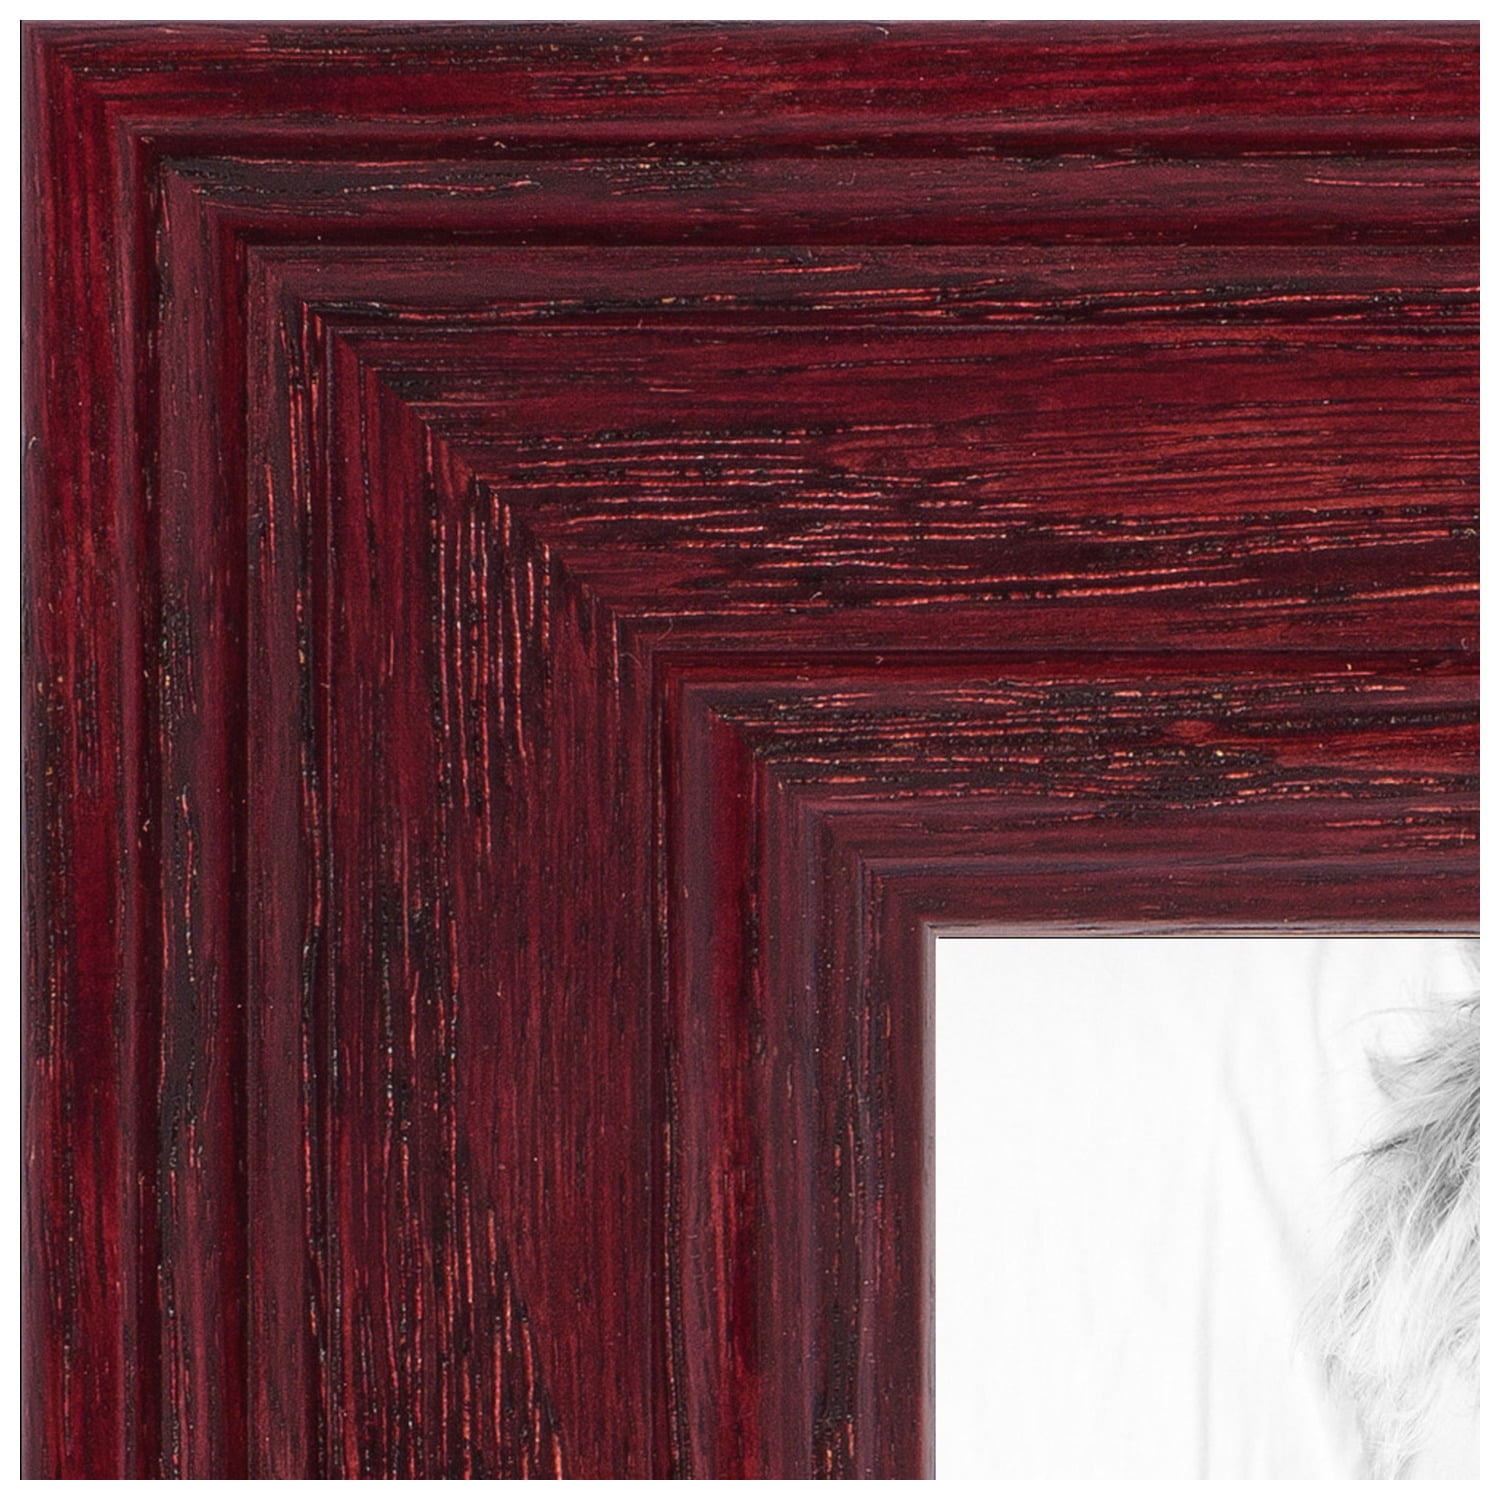 Arttoframes 16x24 Inch Cherry Picture Frame This Red Wood Poster Frame